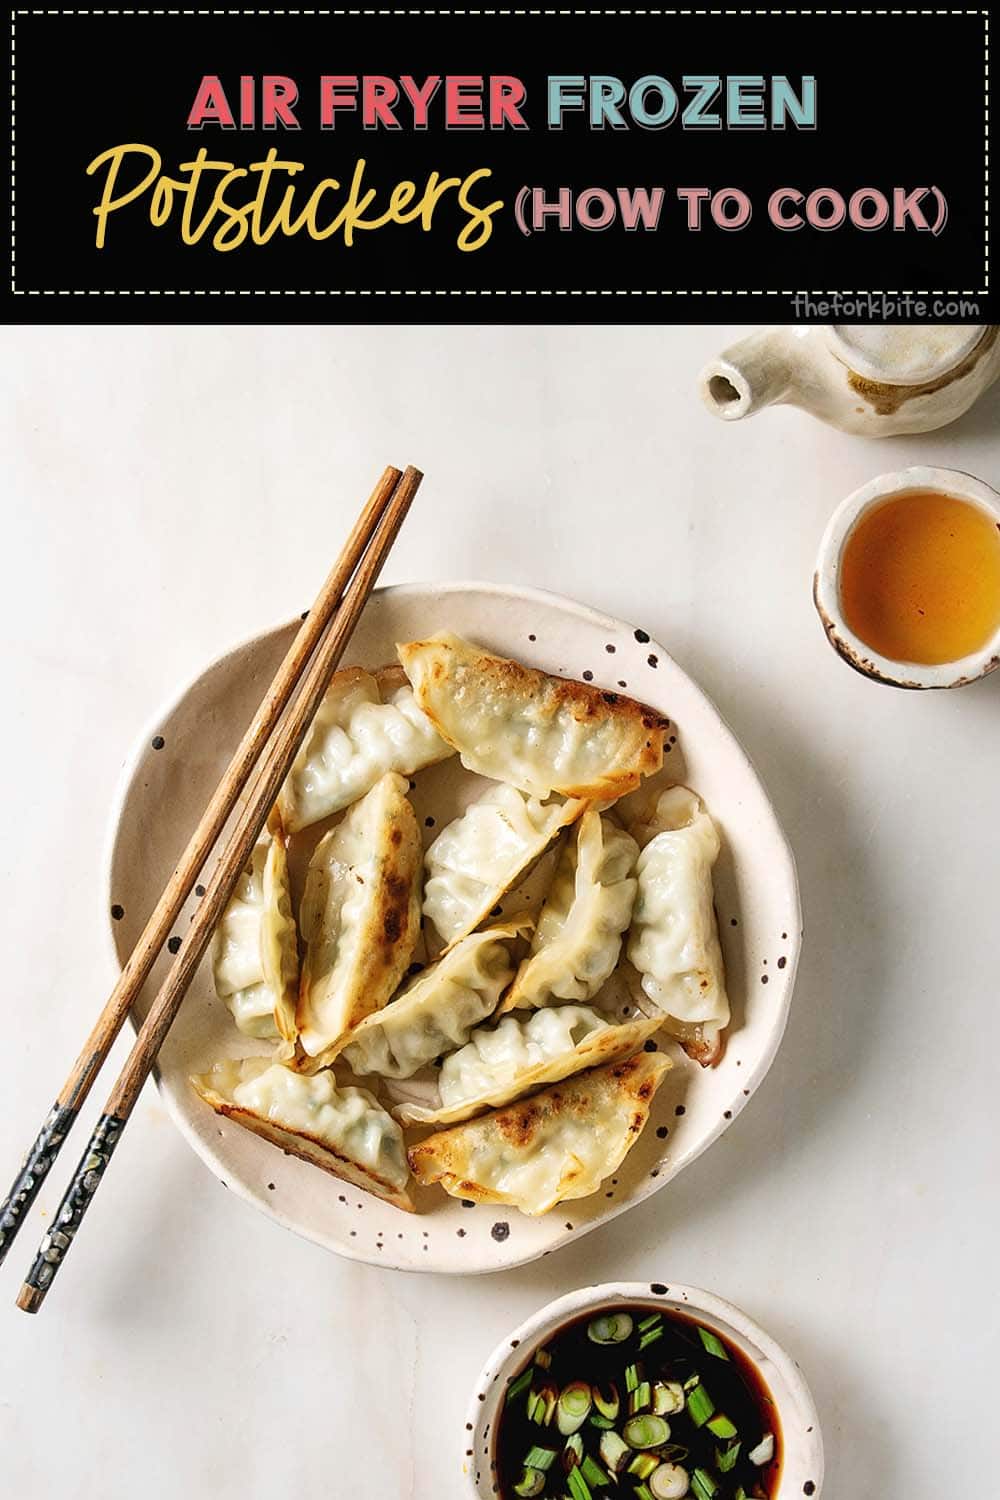 Frozen potstickers are only one type of dumpling. There are many other types, but generally, they all take about 10 minutes to cook in an air-fryer at a temperature of 350°F.